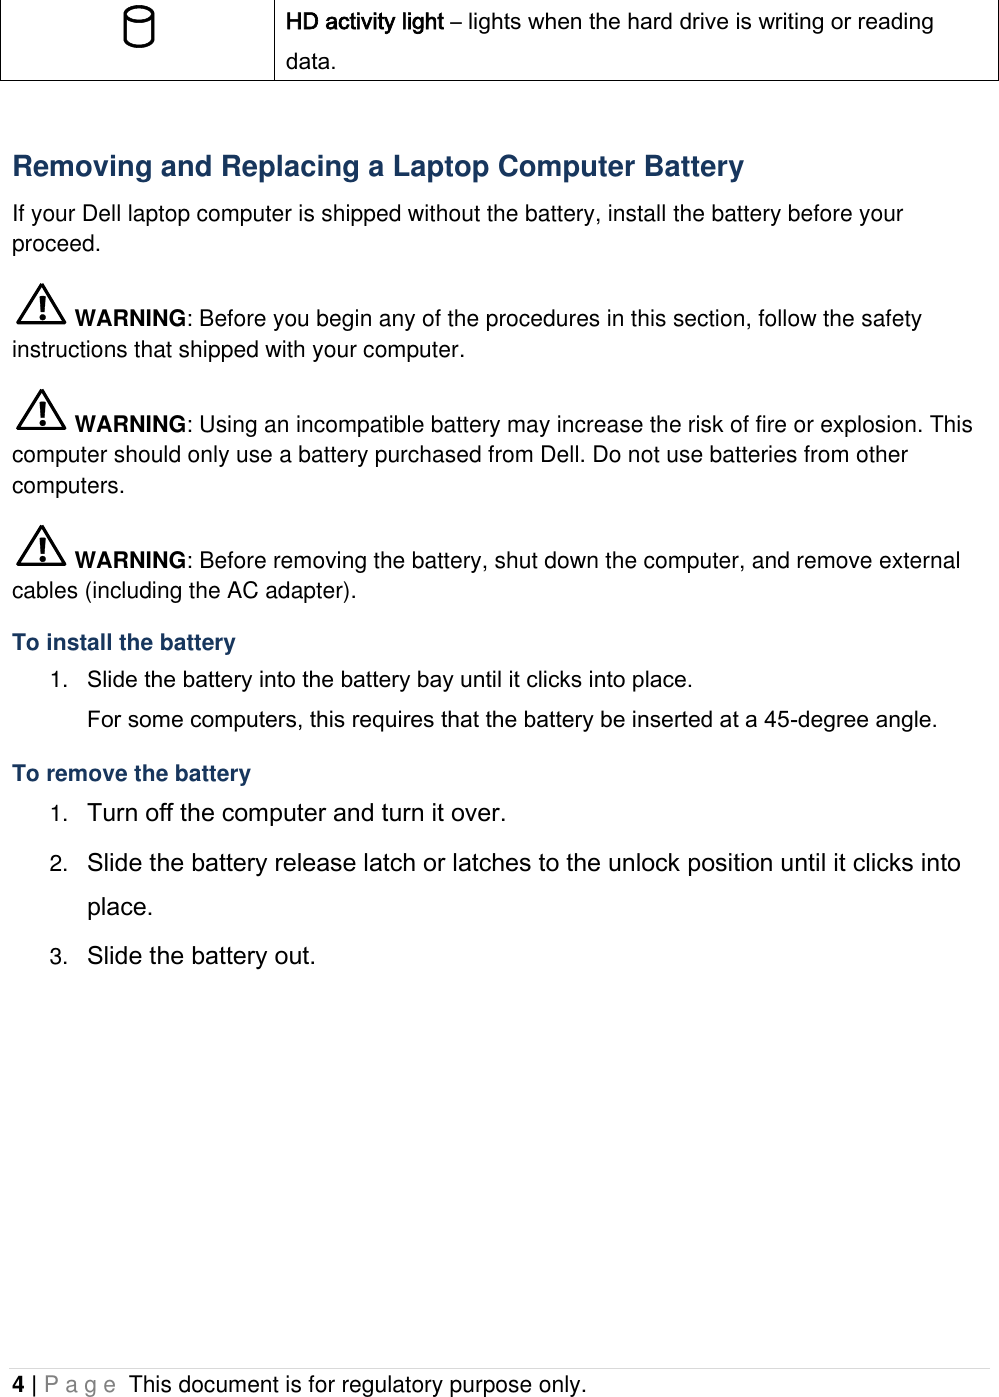 4 | P a g e  This document is for regulatory purpose only.   HD activity light – lights when the hard drive is writing or reading data.  Removing and Replacing a Laptop Computer Battery If your Dell laptop computer is shipped without the battery, install the battery before your proceed.  WARNING: Before you begin any of the procedures in this section, follow the safety instructions that shipped with your computer.  WARNING: Using an incompatible battery may increase the risk of fire or explosion. This computer should only use a battery purchased from Dell. Do not use batteries from other computers.  WARNING: Before removing the battery, shut down the computer, and remove external cables (including the AC adapter). To install the battery 1. Slide the battery into the battery bay until it clicks into place.  For some computers, this requires that the battery be inserted at a 45-degree angle. To remove the battery 1. Turn off the computer and turn it over. 2. Slide the battery release latch or latches to the unlock position until it clicks into place. 3. Slide the battery out.    